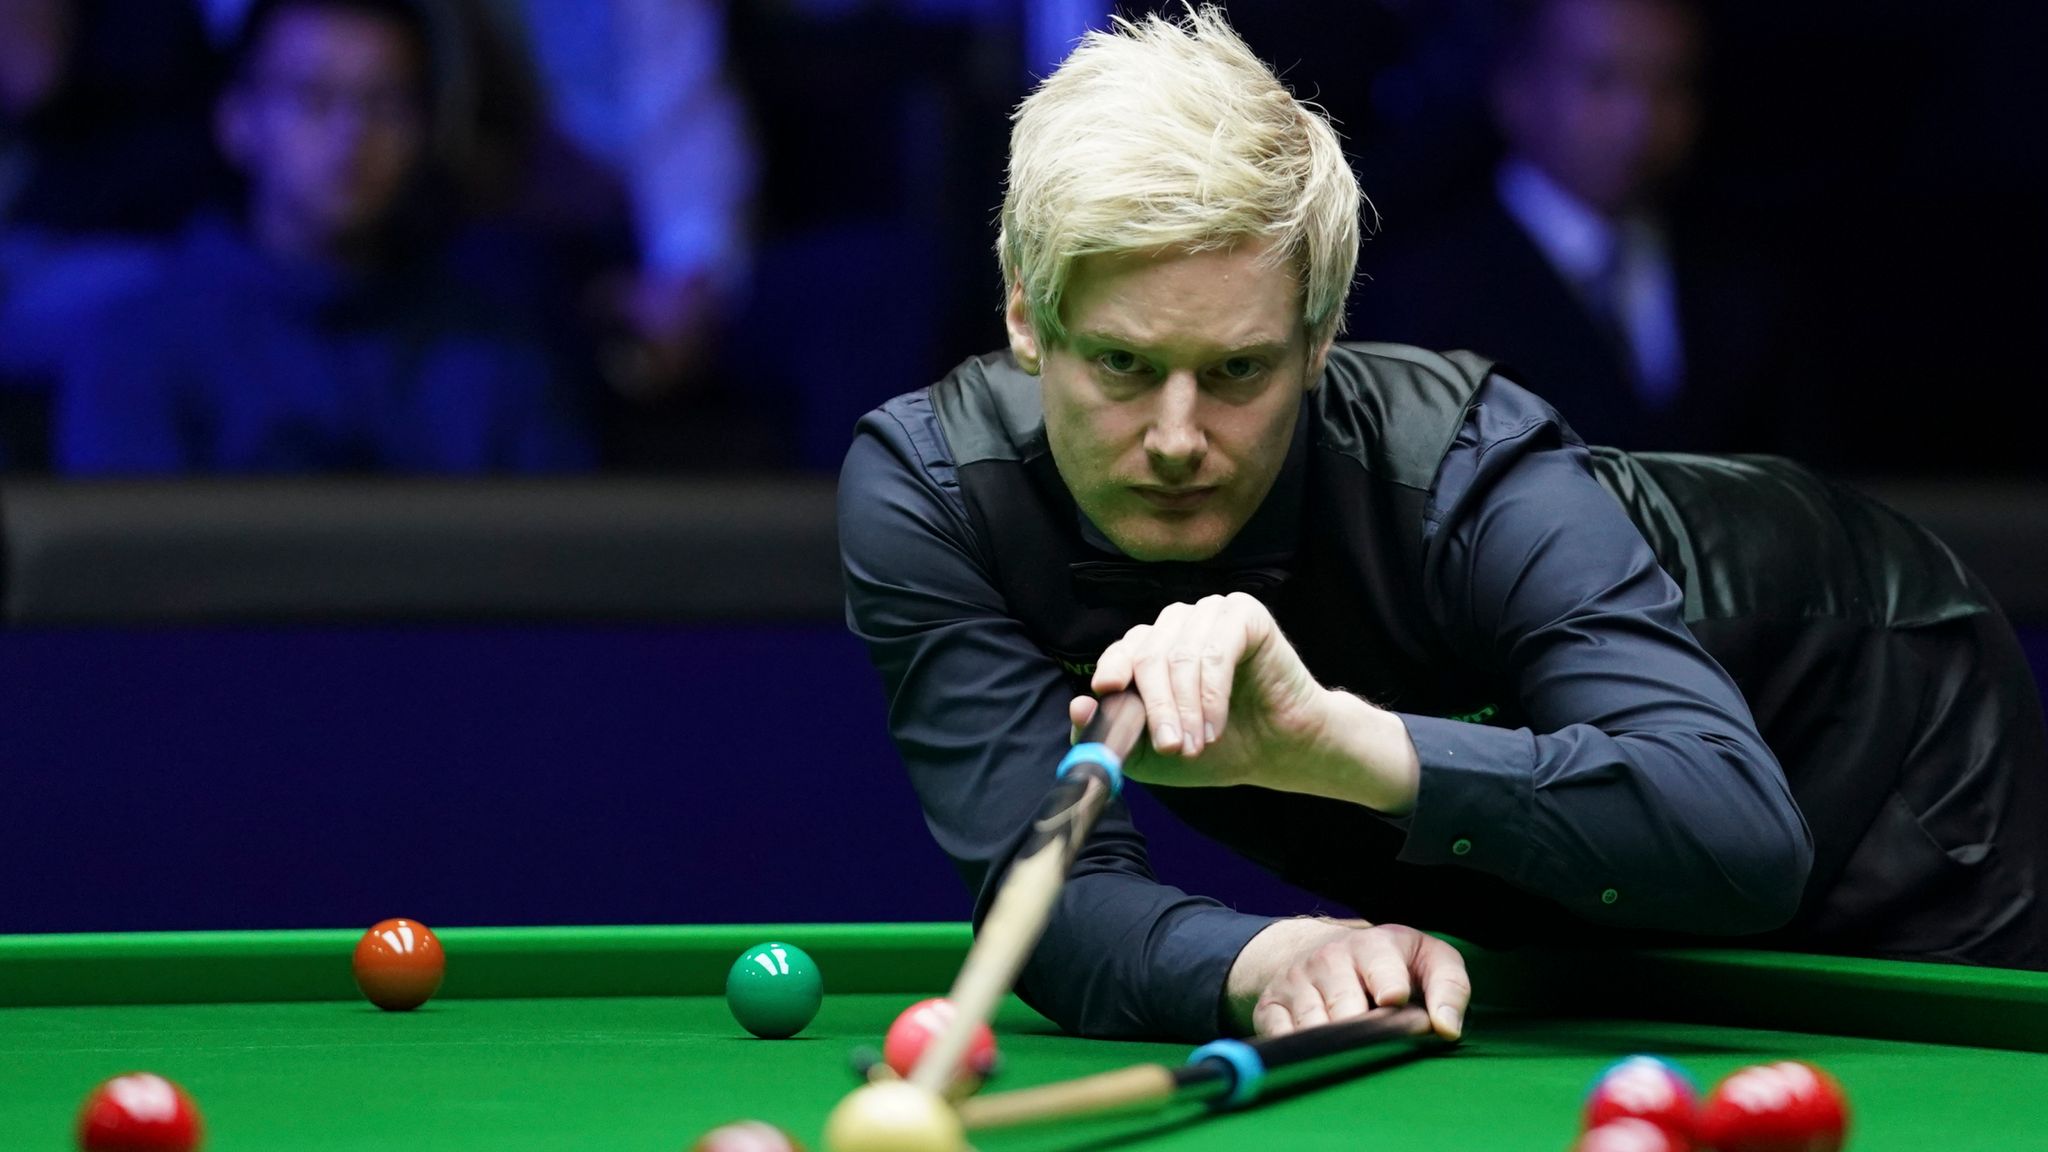 Neil Robertson relieved to make return to competitive snooker, despite Championship League exit Snooker News Sky Sports